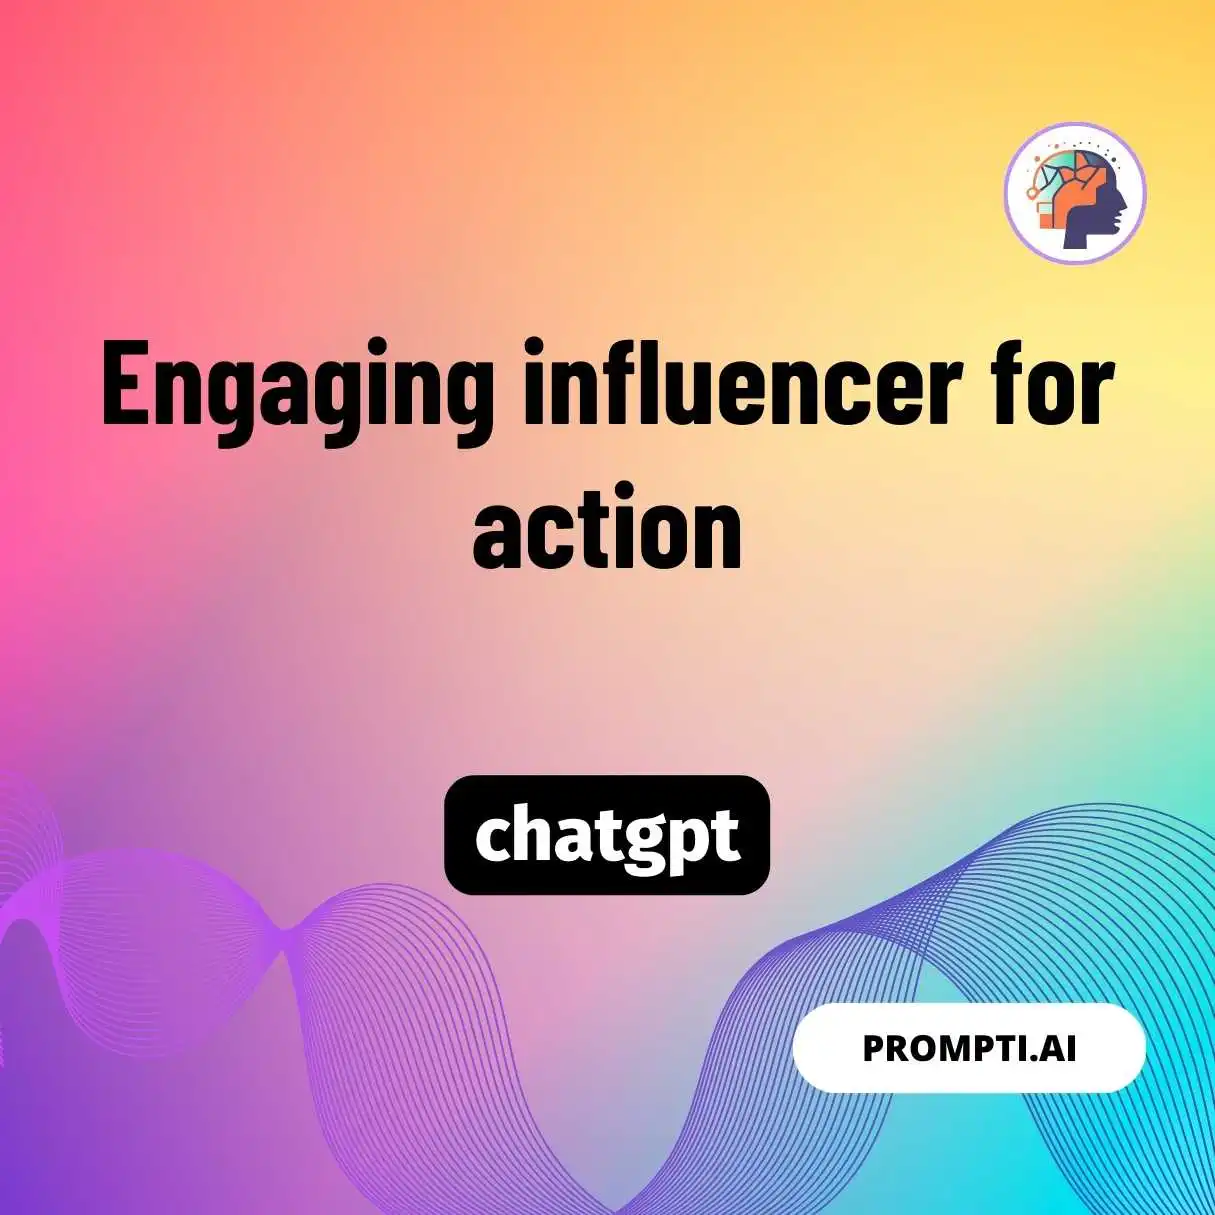 Engaging influencer for action